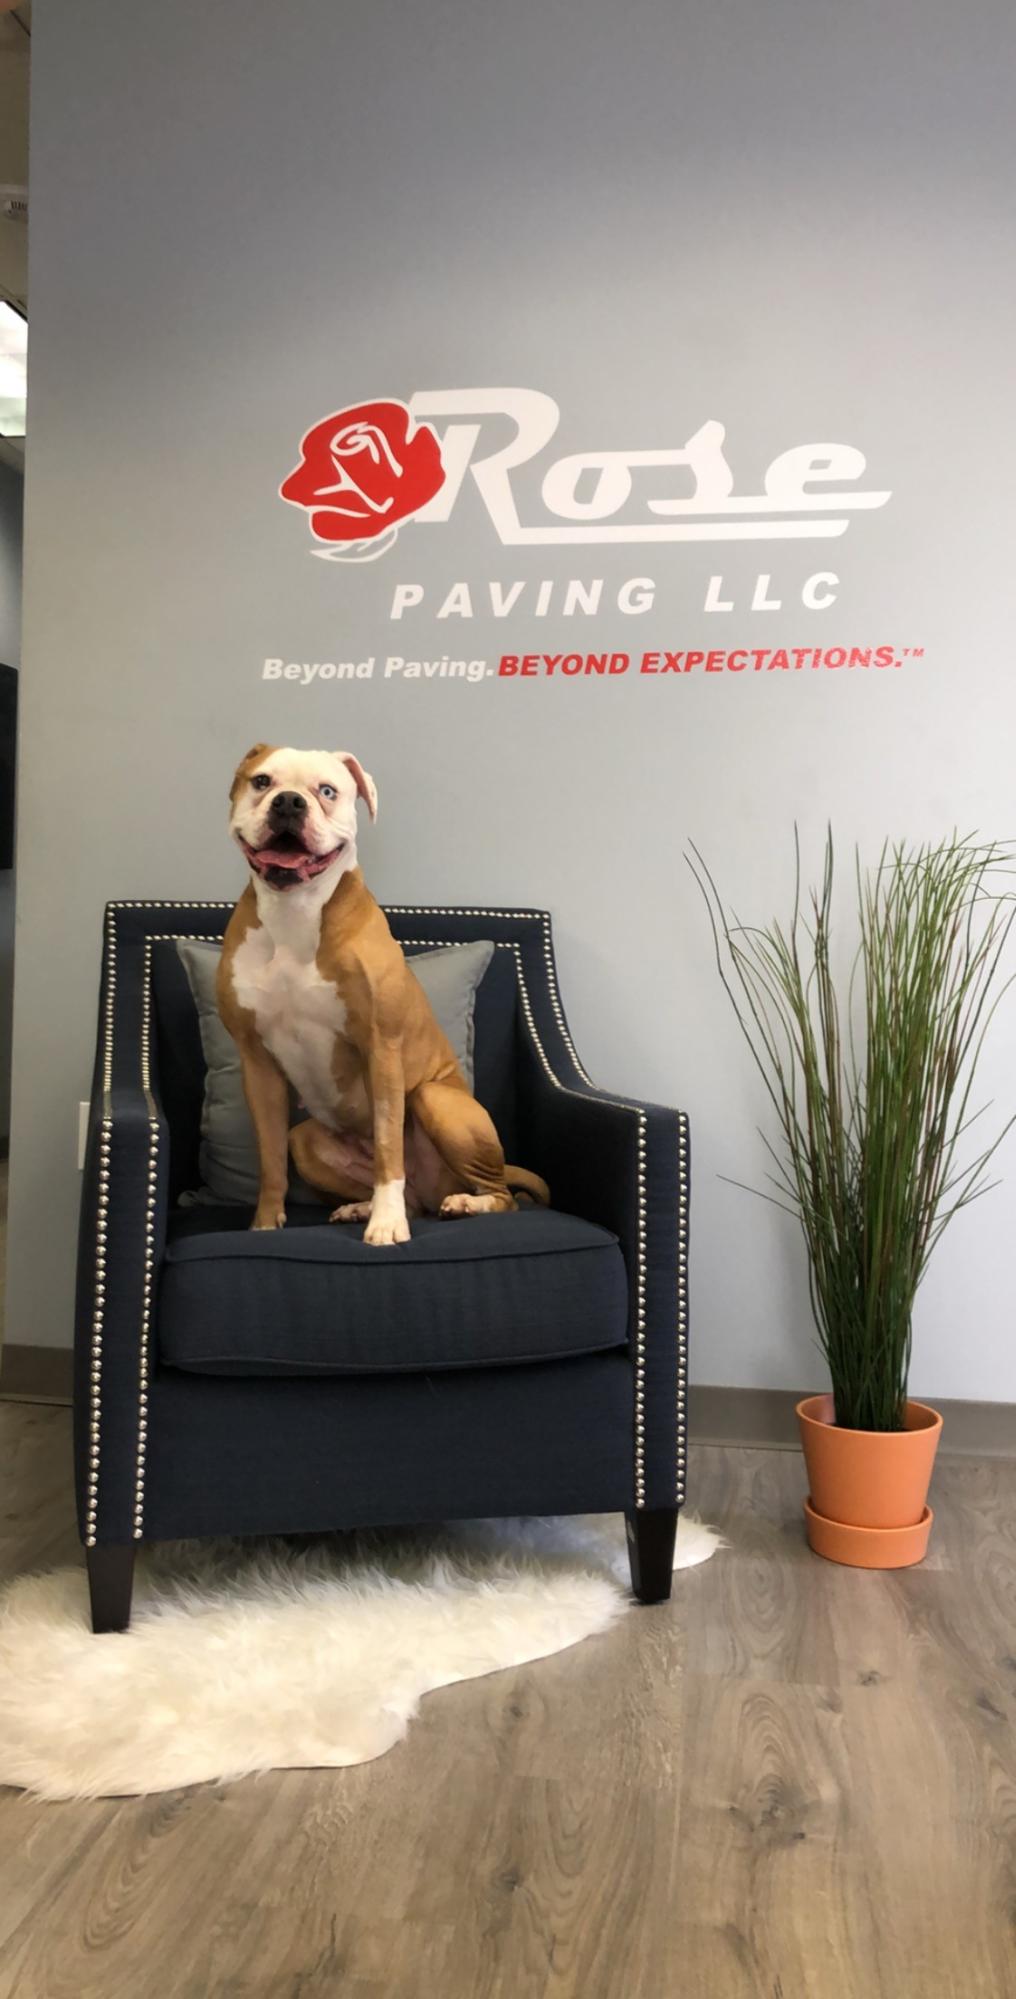 Rose Paving Contractors Fosters Rosie the dog in Atlanta